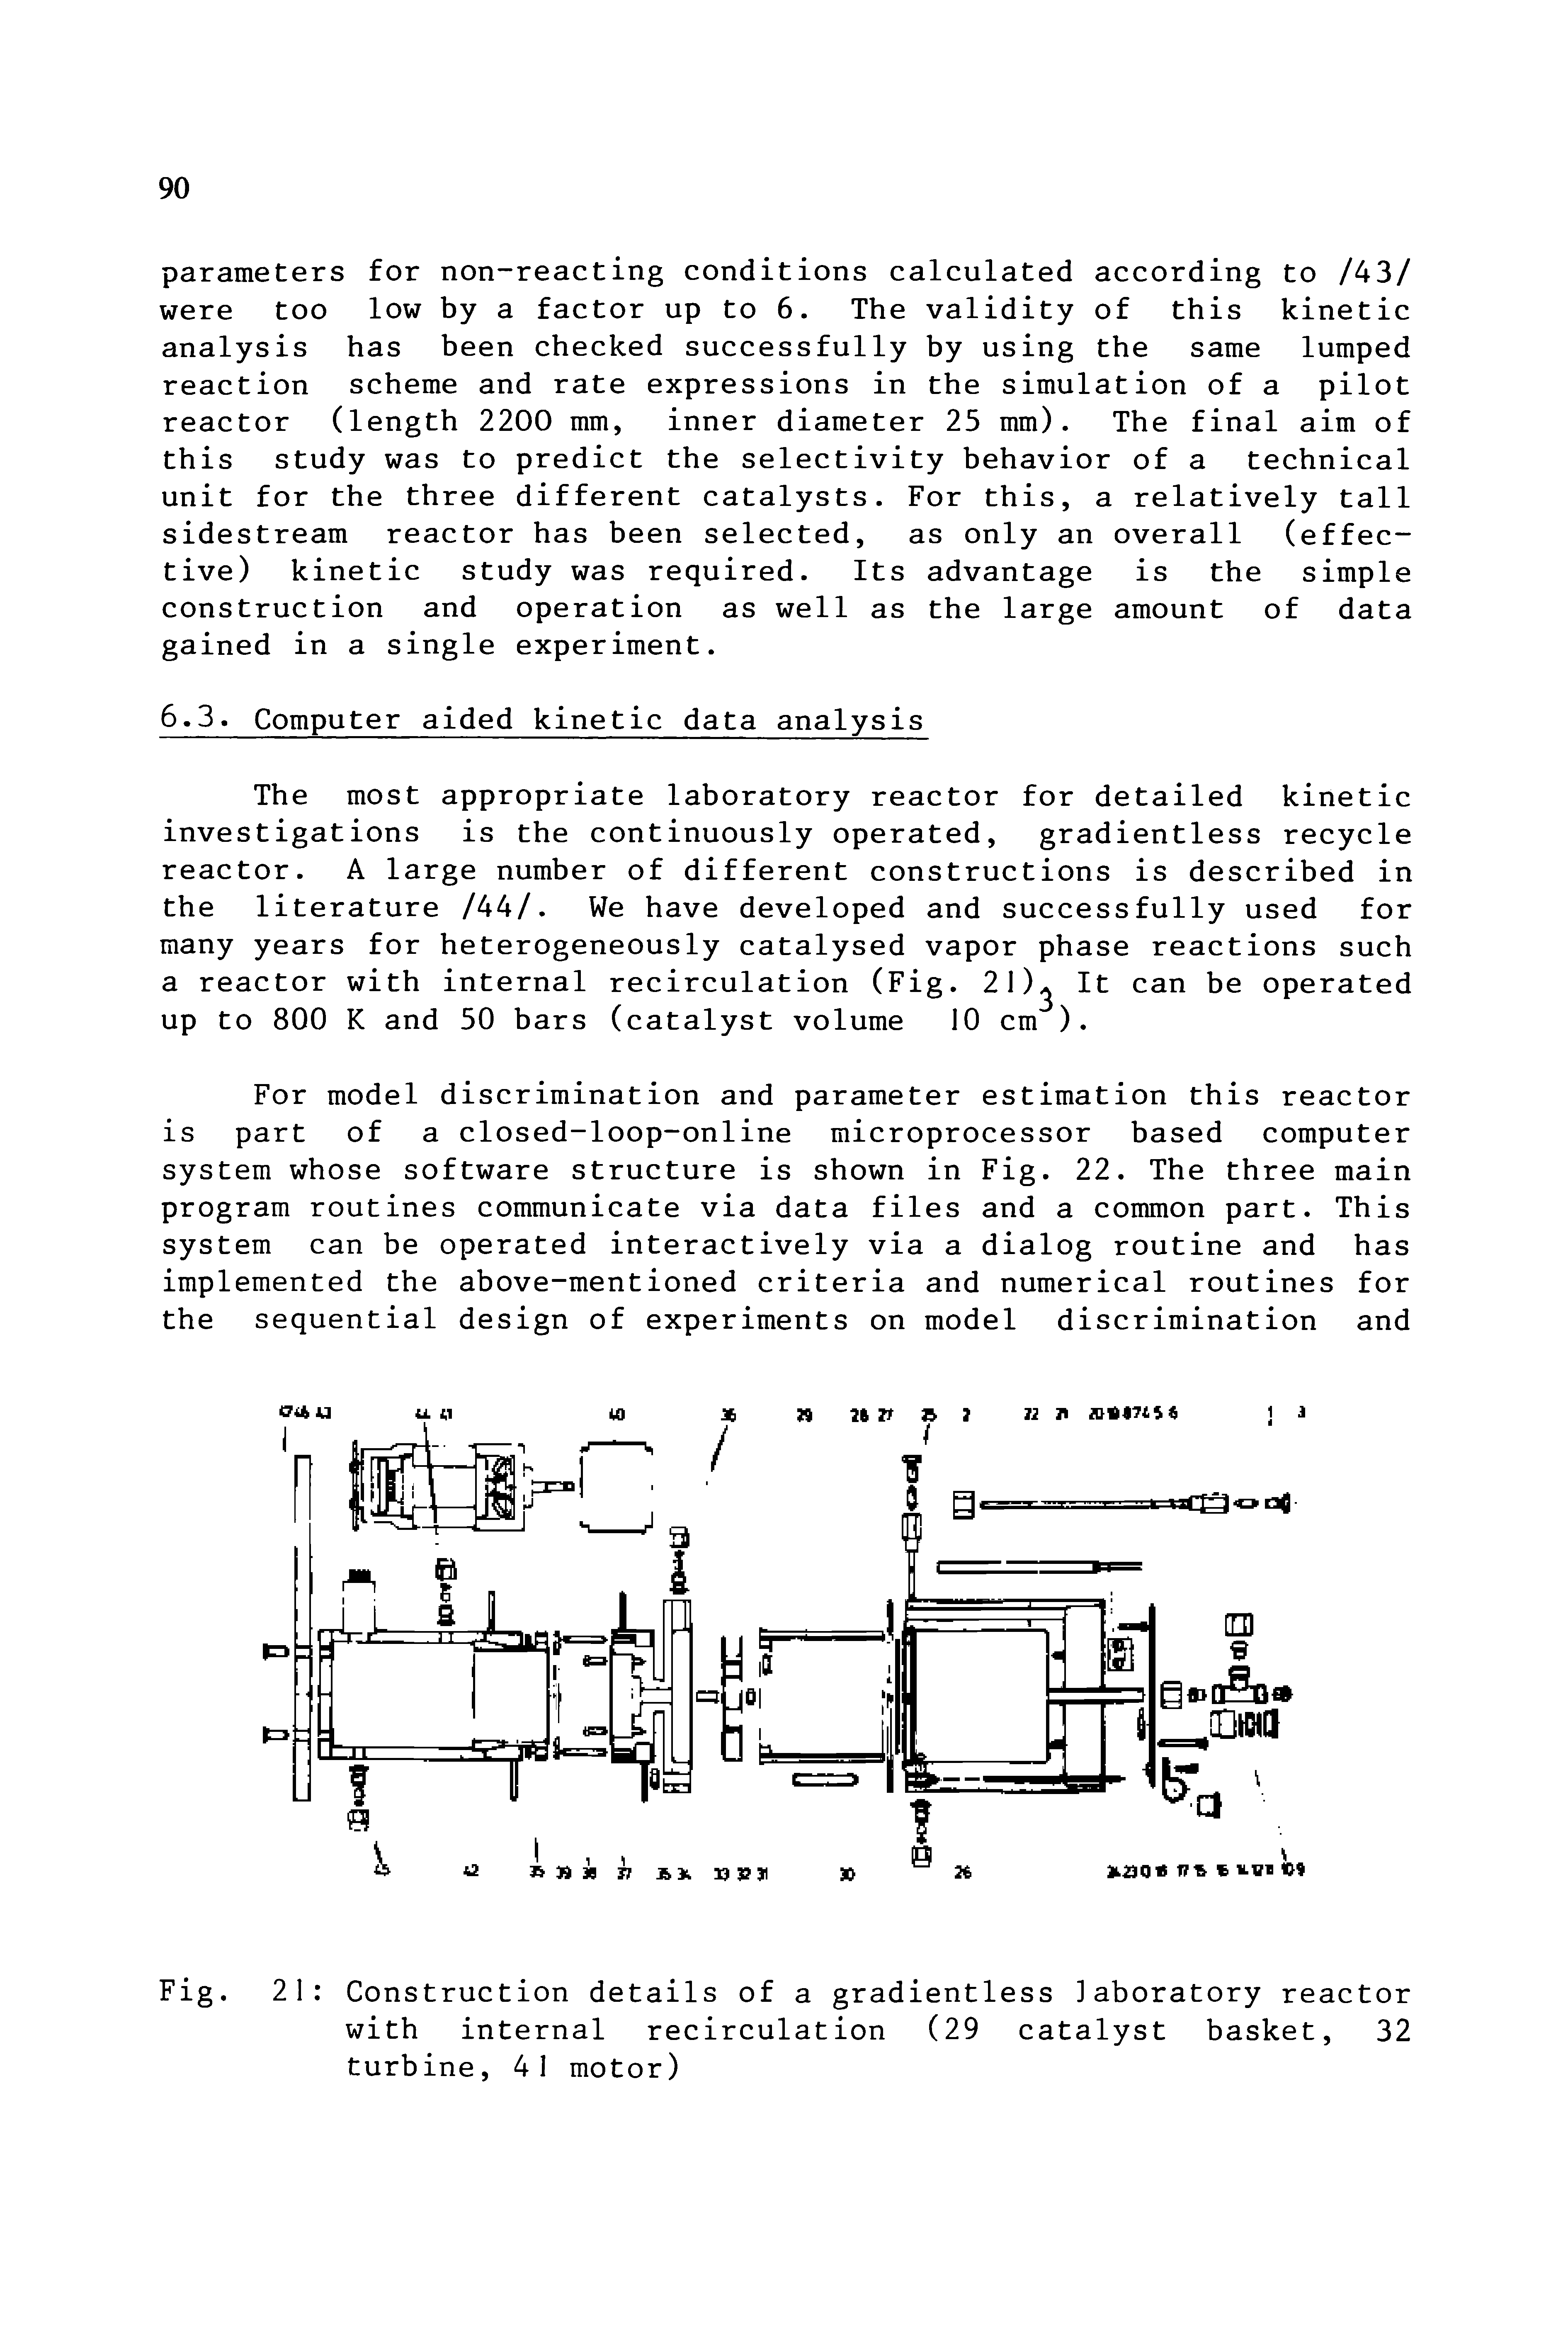 Fig. 21 Construction details of a gradientless laboratory reactor with internal recirculation (29 catalyst basket, 32 turbine, 41 motor)...